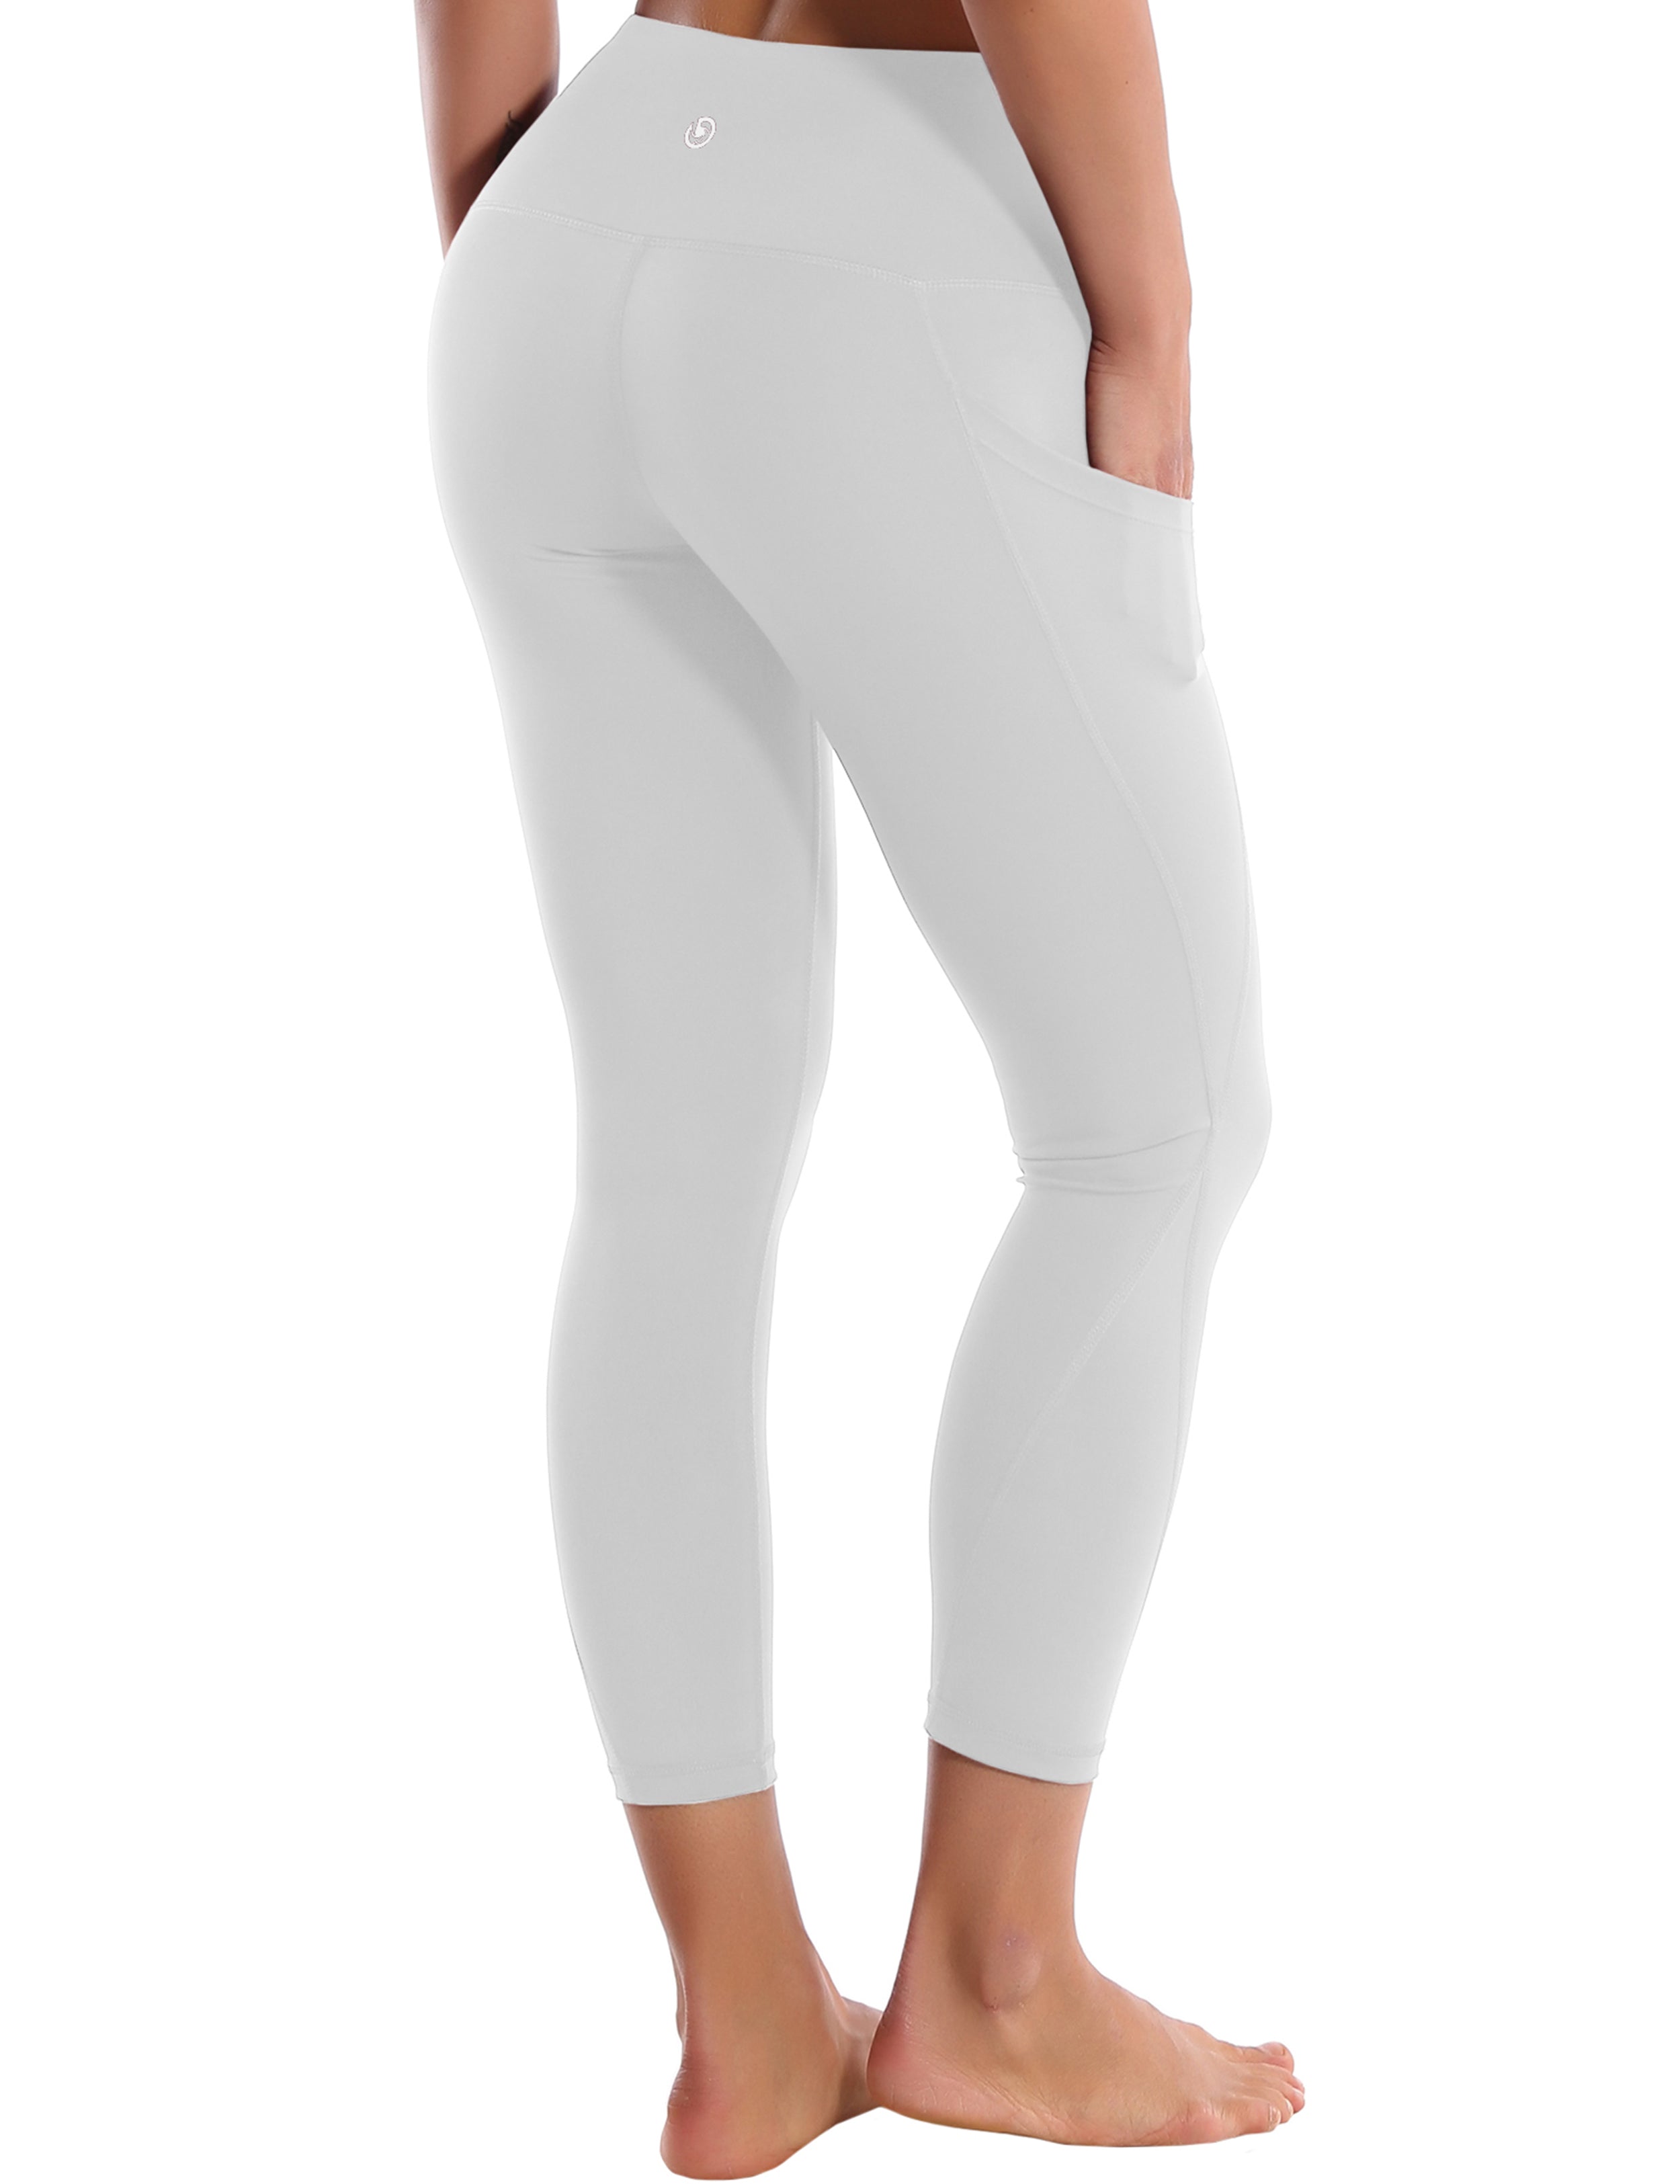 22" High Waist Side Pockets Capris lightgray 75%Nylon/25%Spandex Fabric doesn't attract lint easily 4-way stretch No see-through Moisture-wicking Tummy control Inner pocket